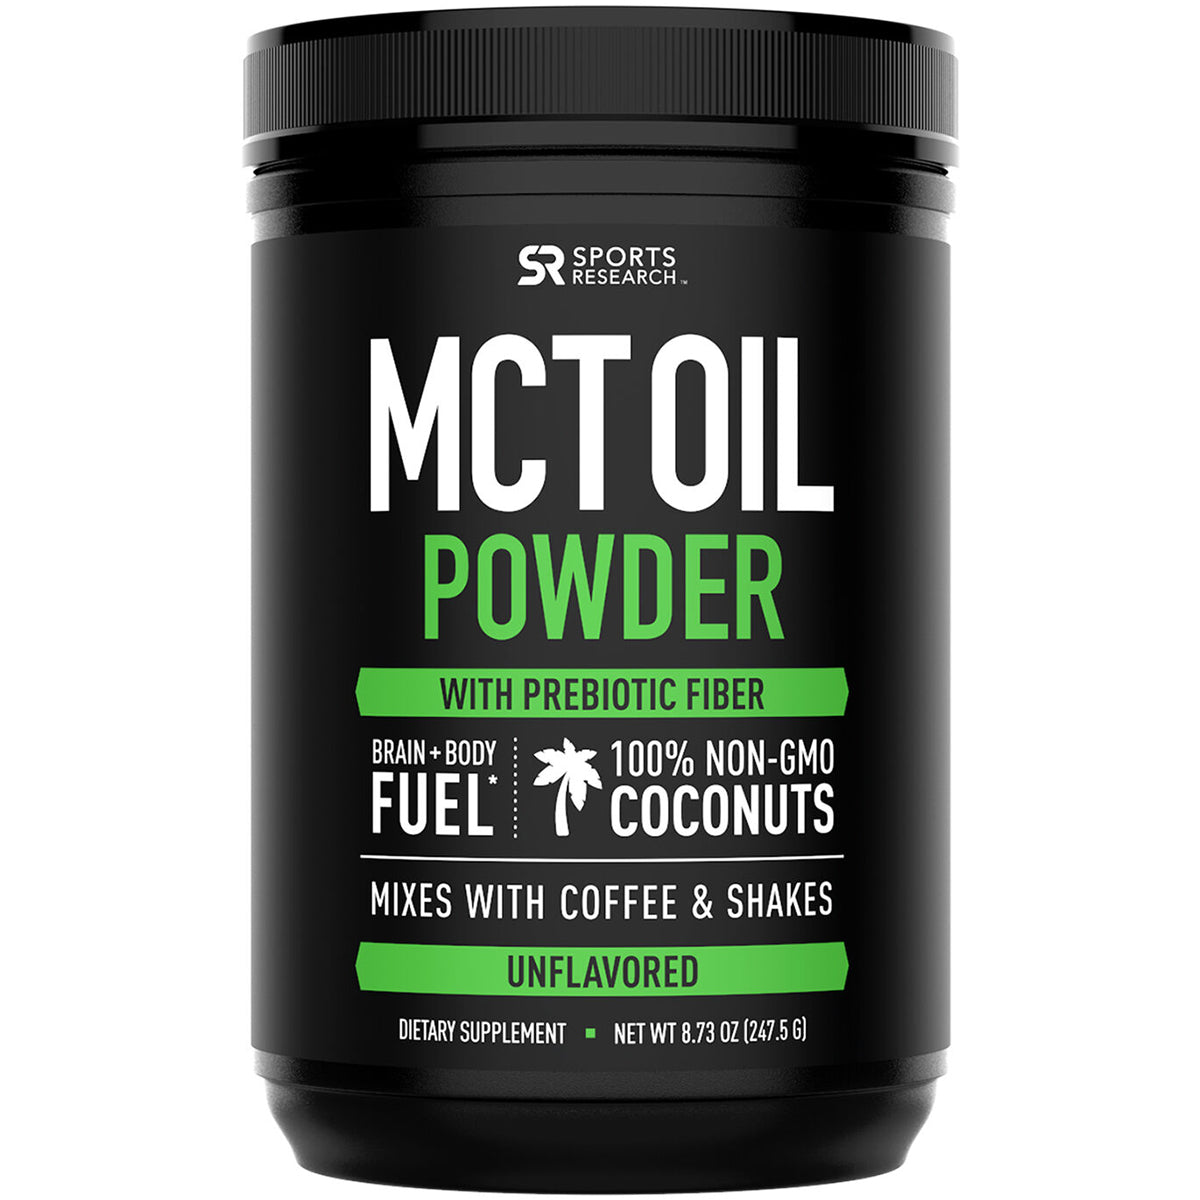 Sports Research MCT Oil Powder Dietary Supplement - 30 Servings - Unflavored Sports Research